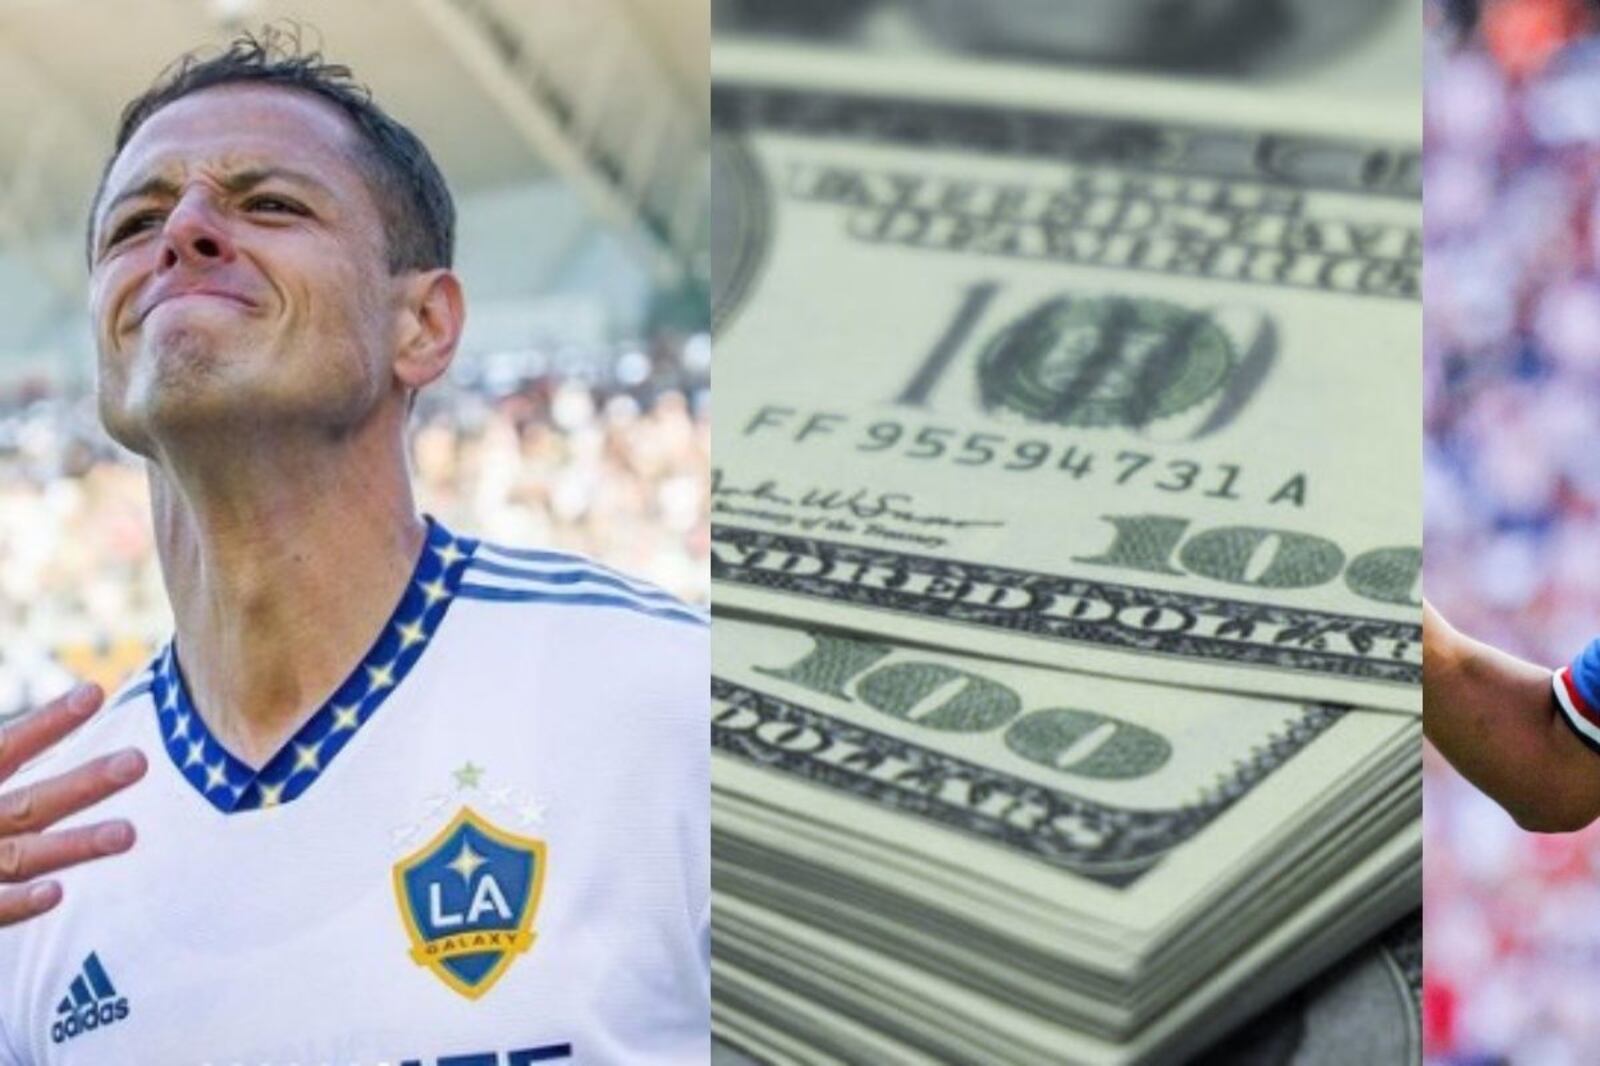 The money that Chicharito asks to return to Chivas and take the place of JJ Macías